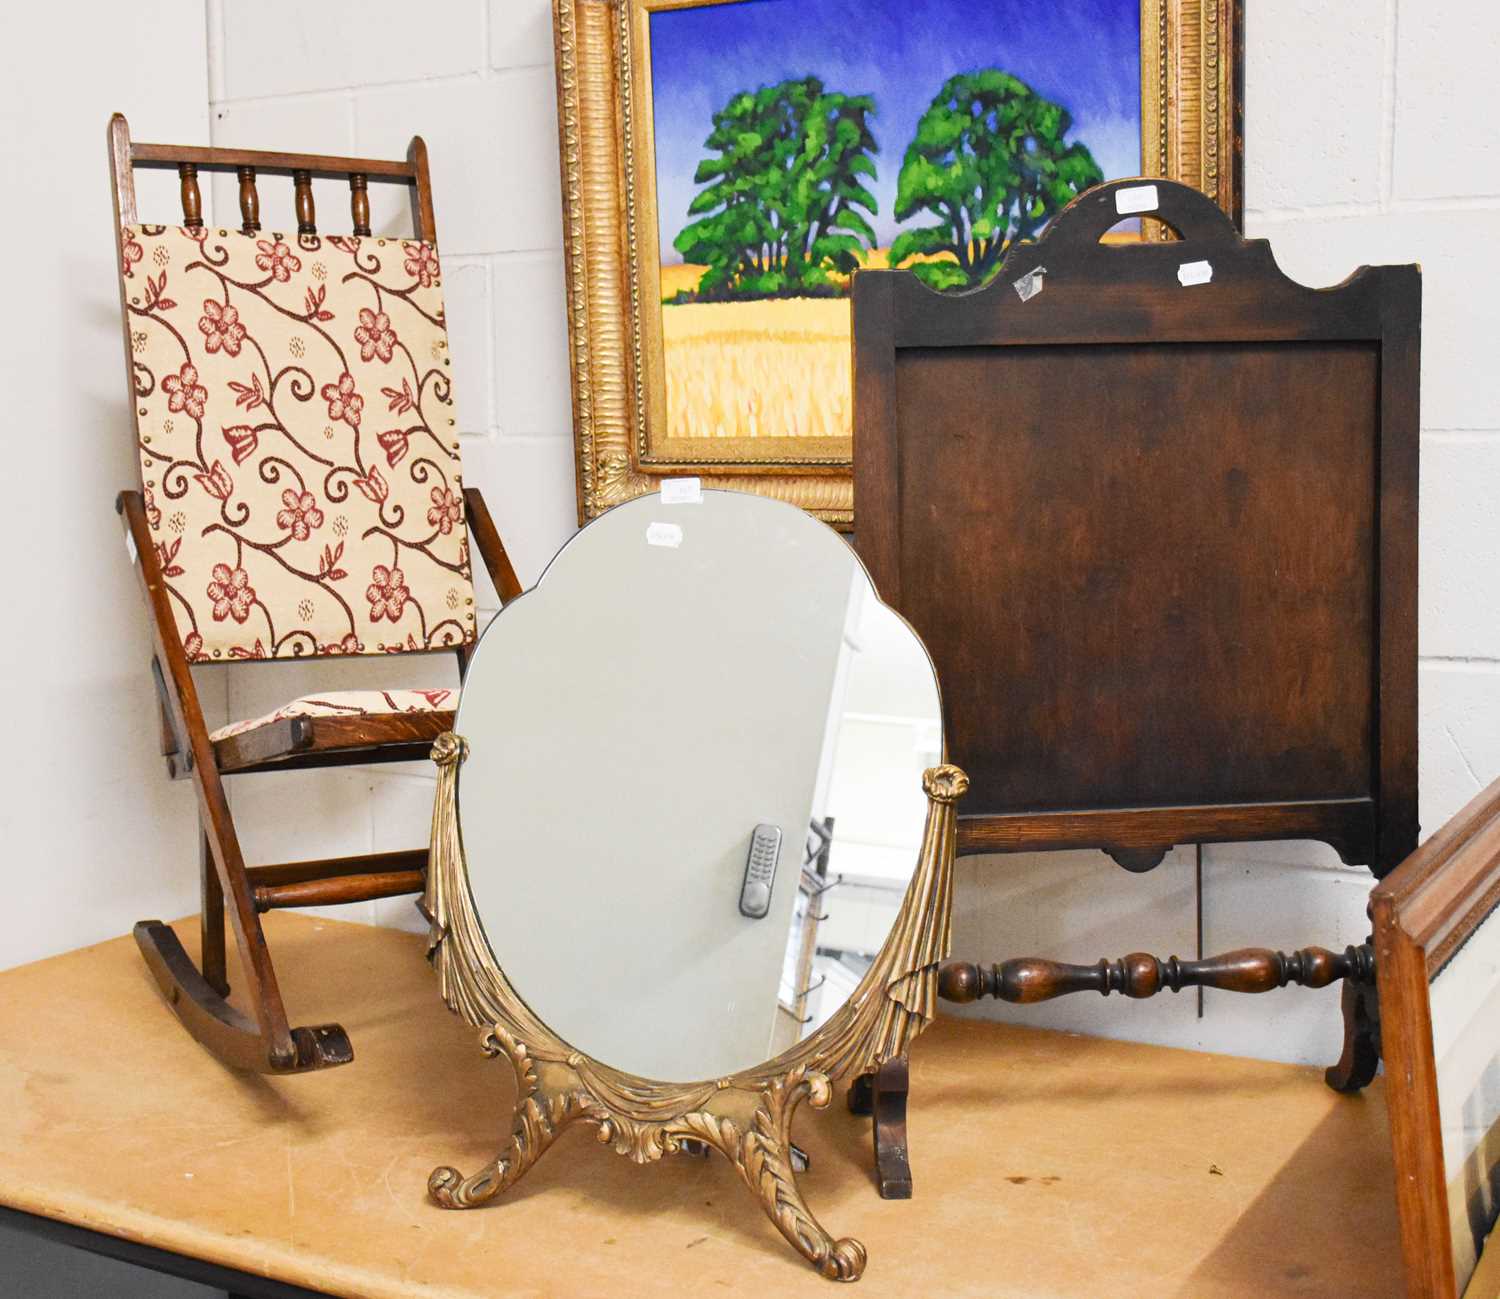 A Folding Oak and Part-Upholstered Rocking Chair, circa 1920, A Shaped Strut Mirror, with gilt